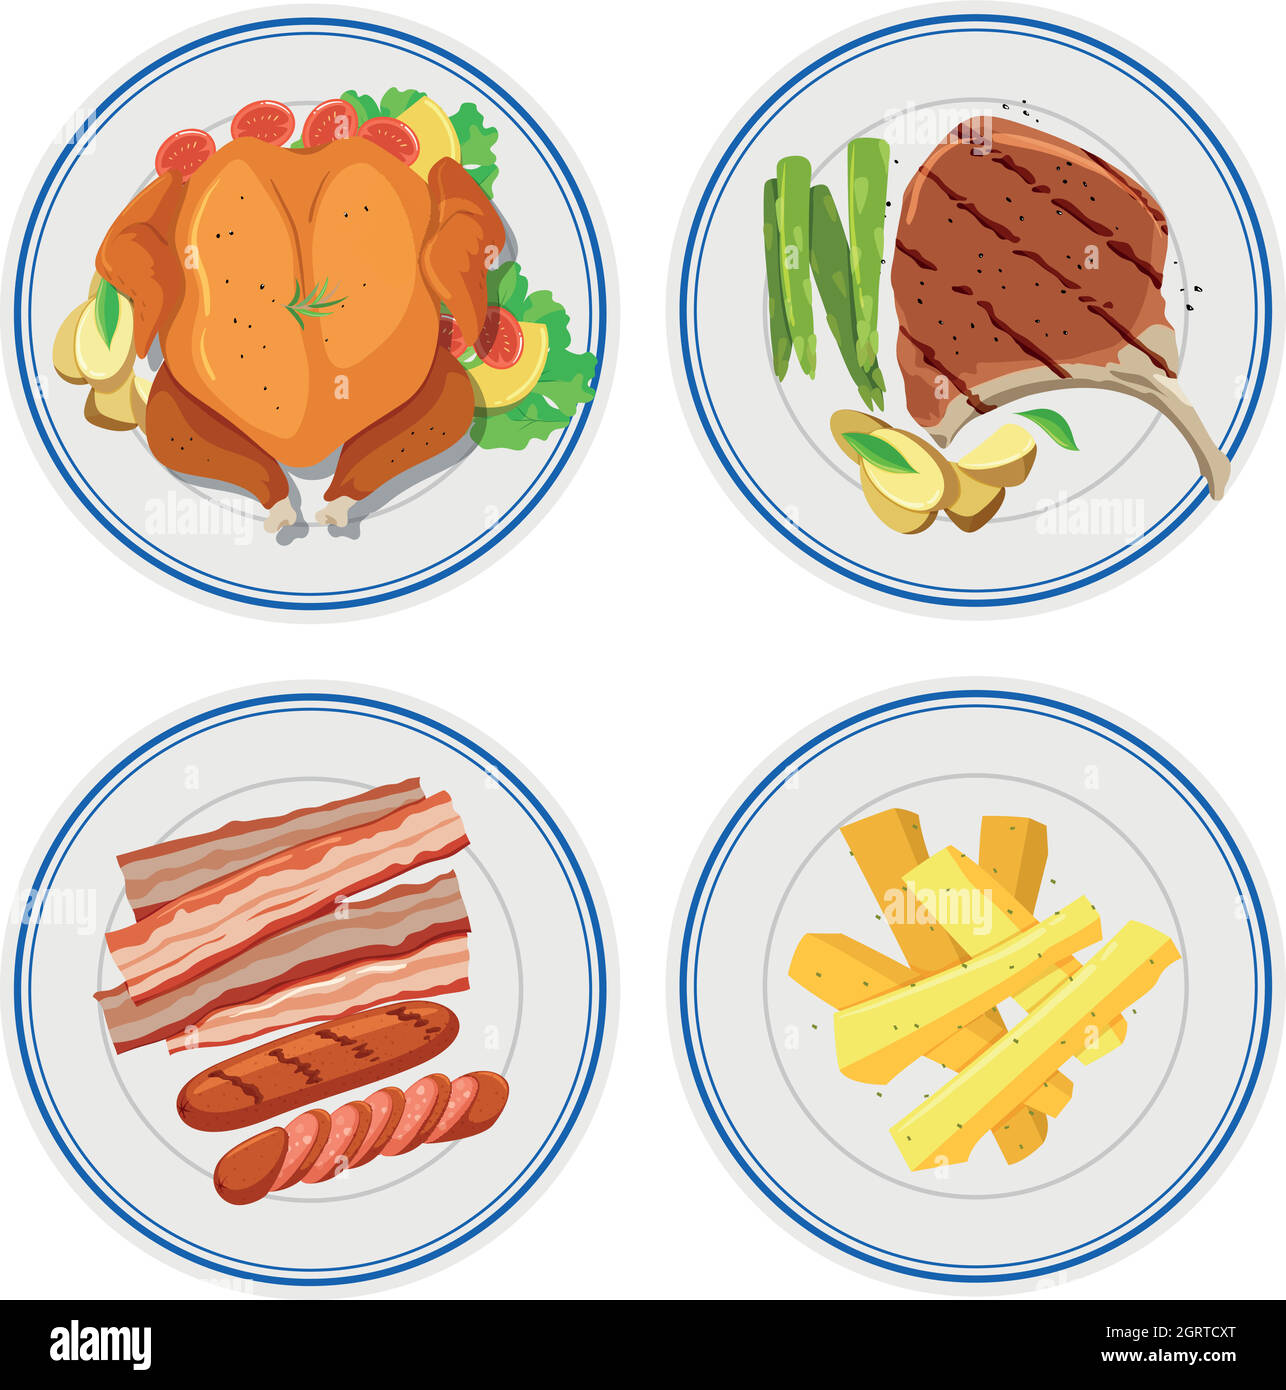 Metal Food Plate: Over 50,169 Royalty-Free Licensable Stock Illustrations &  Drawings